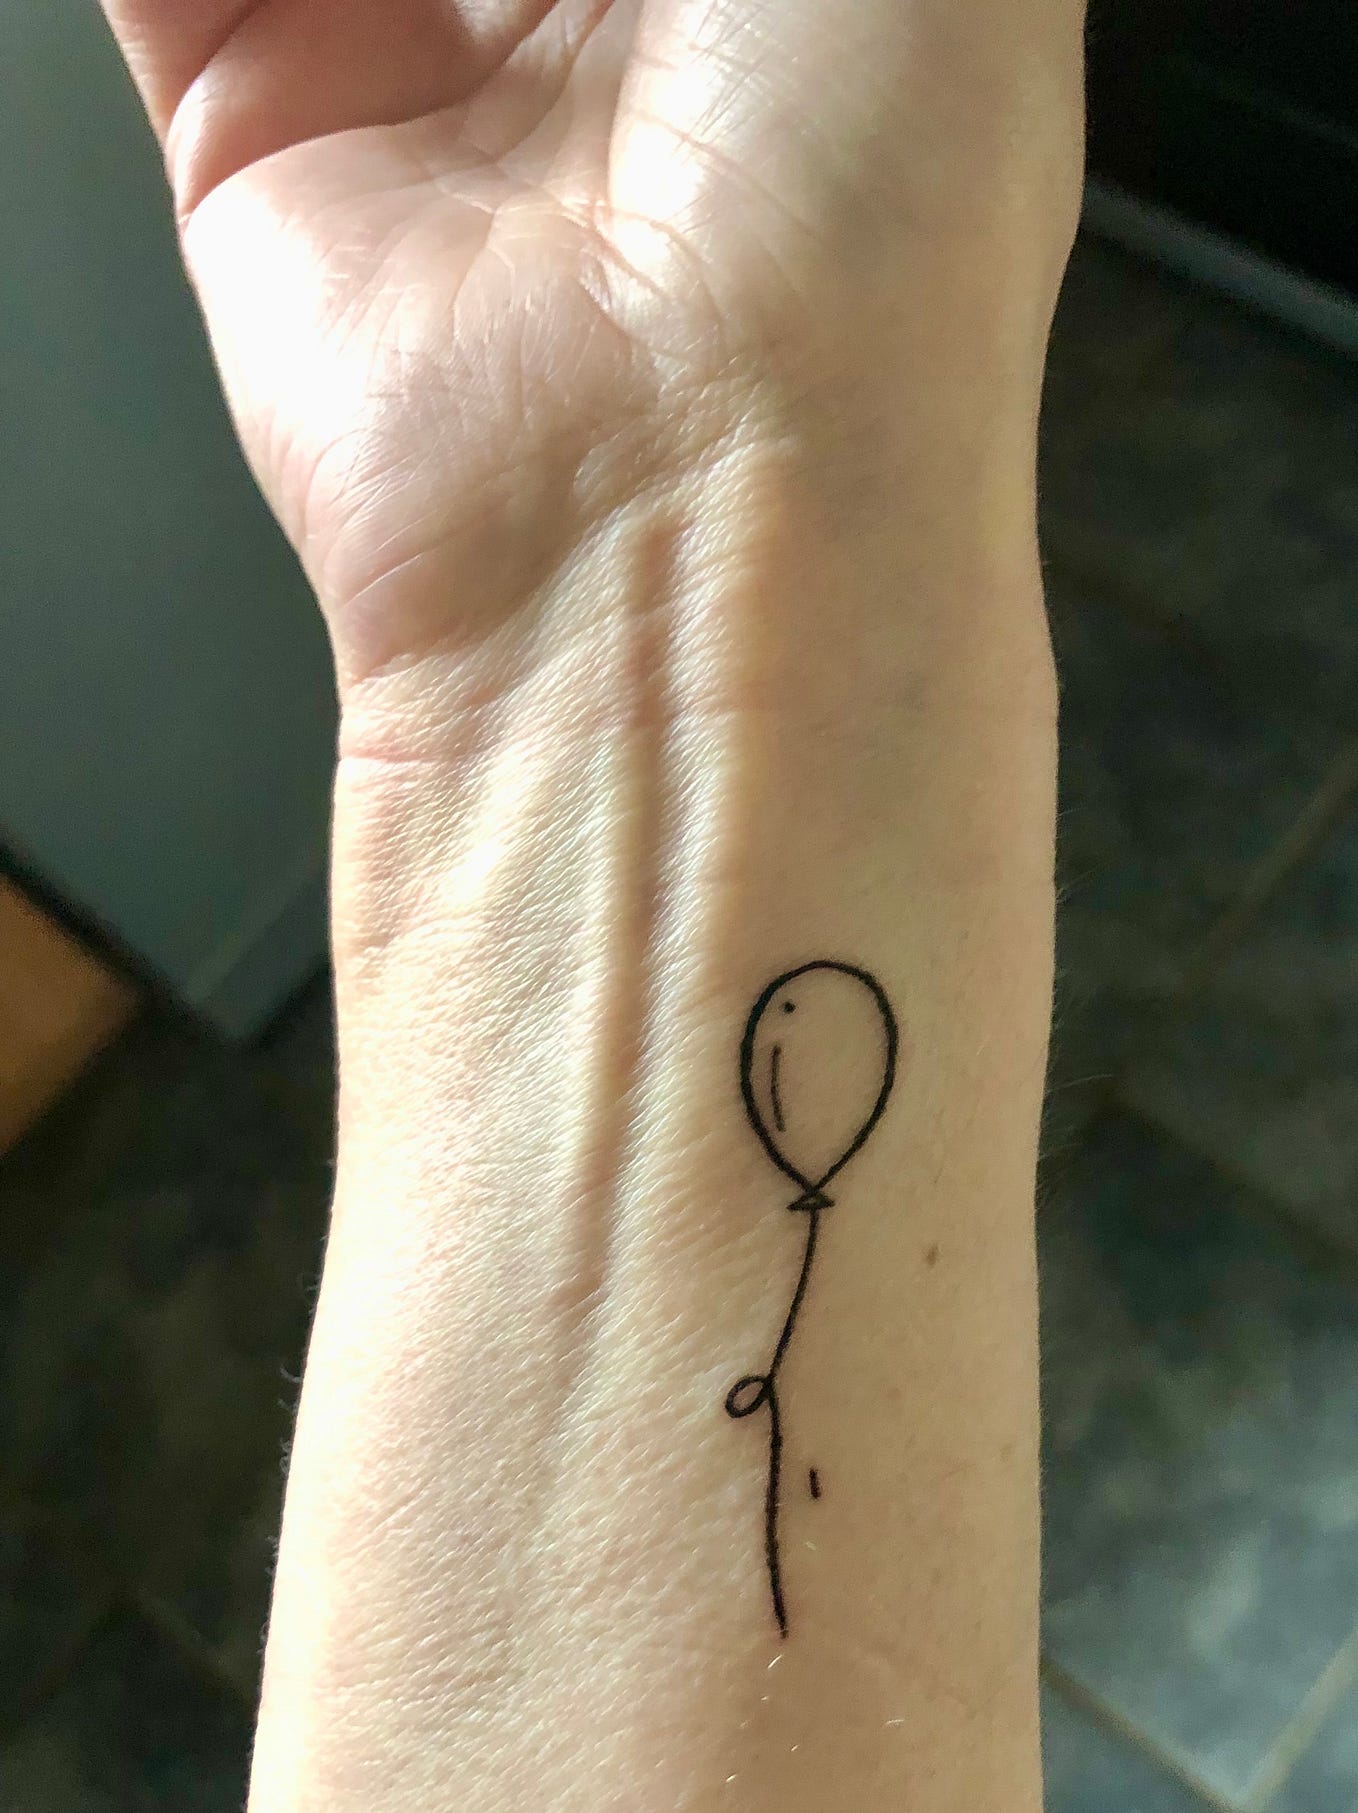 A Tattoo Changed My Life